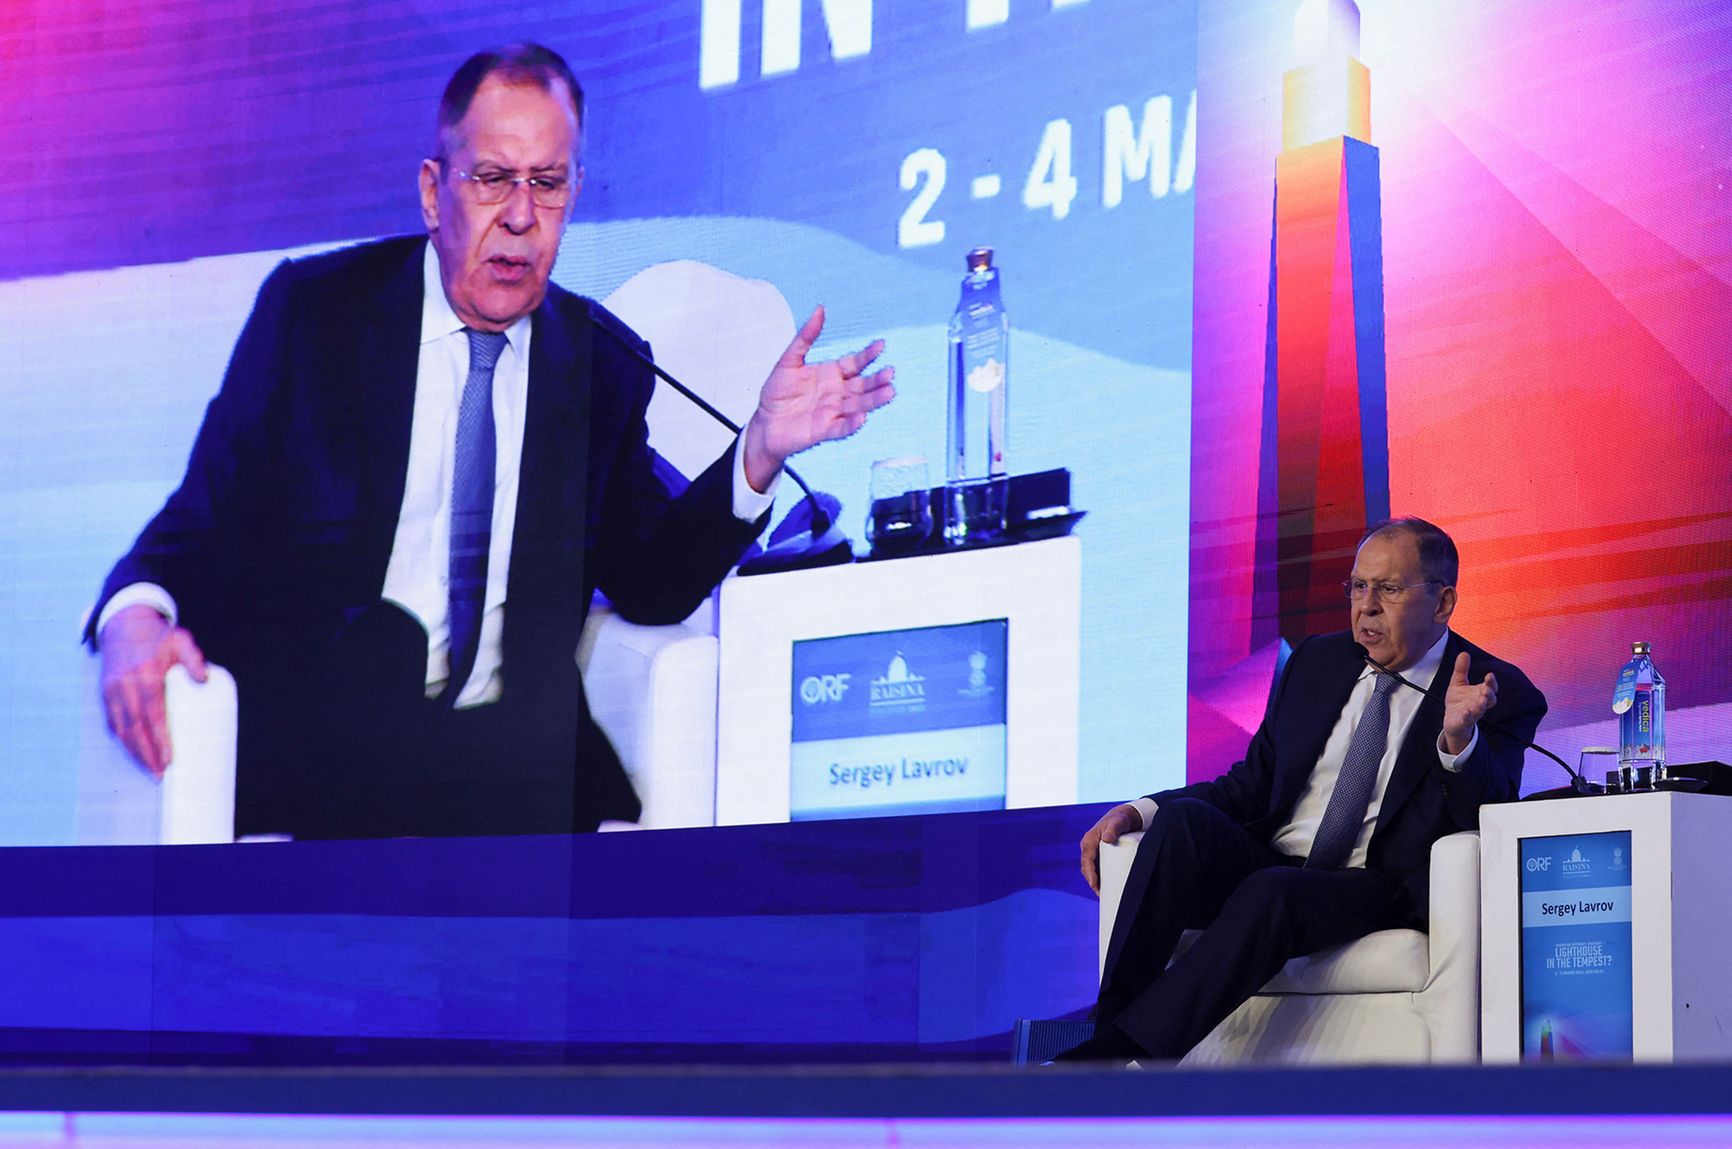 Sergey Lavrov at the Raisina Dialogue conference